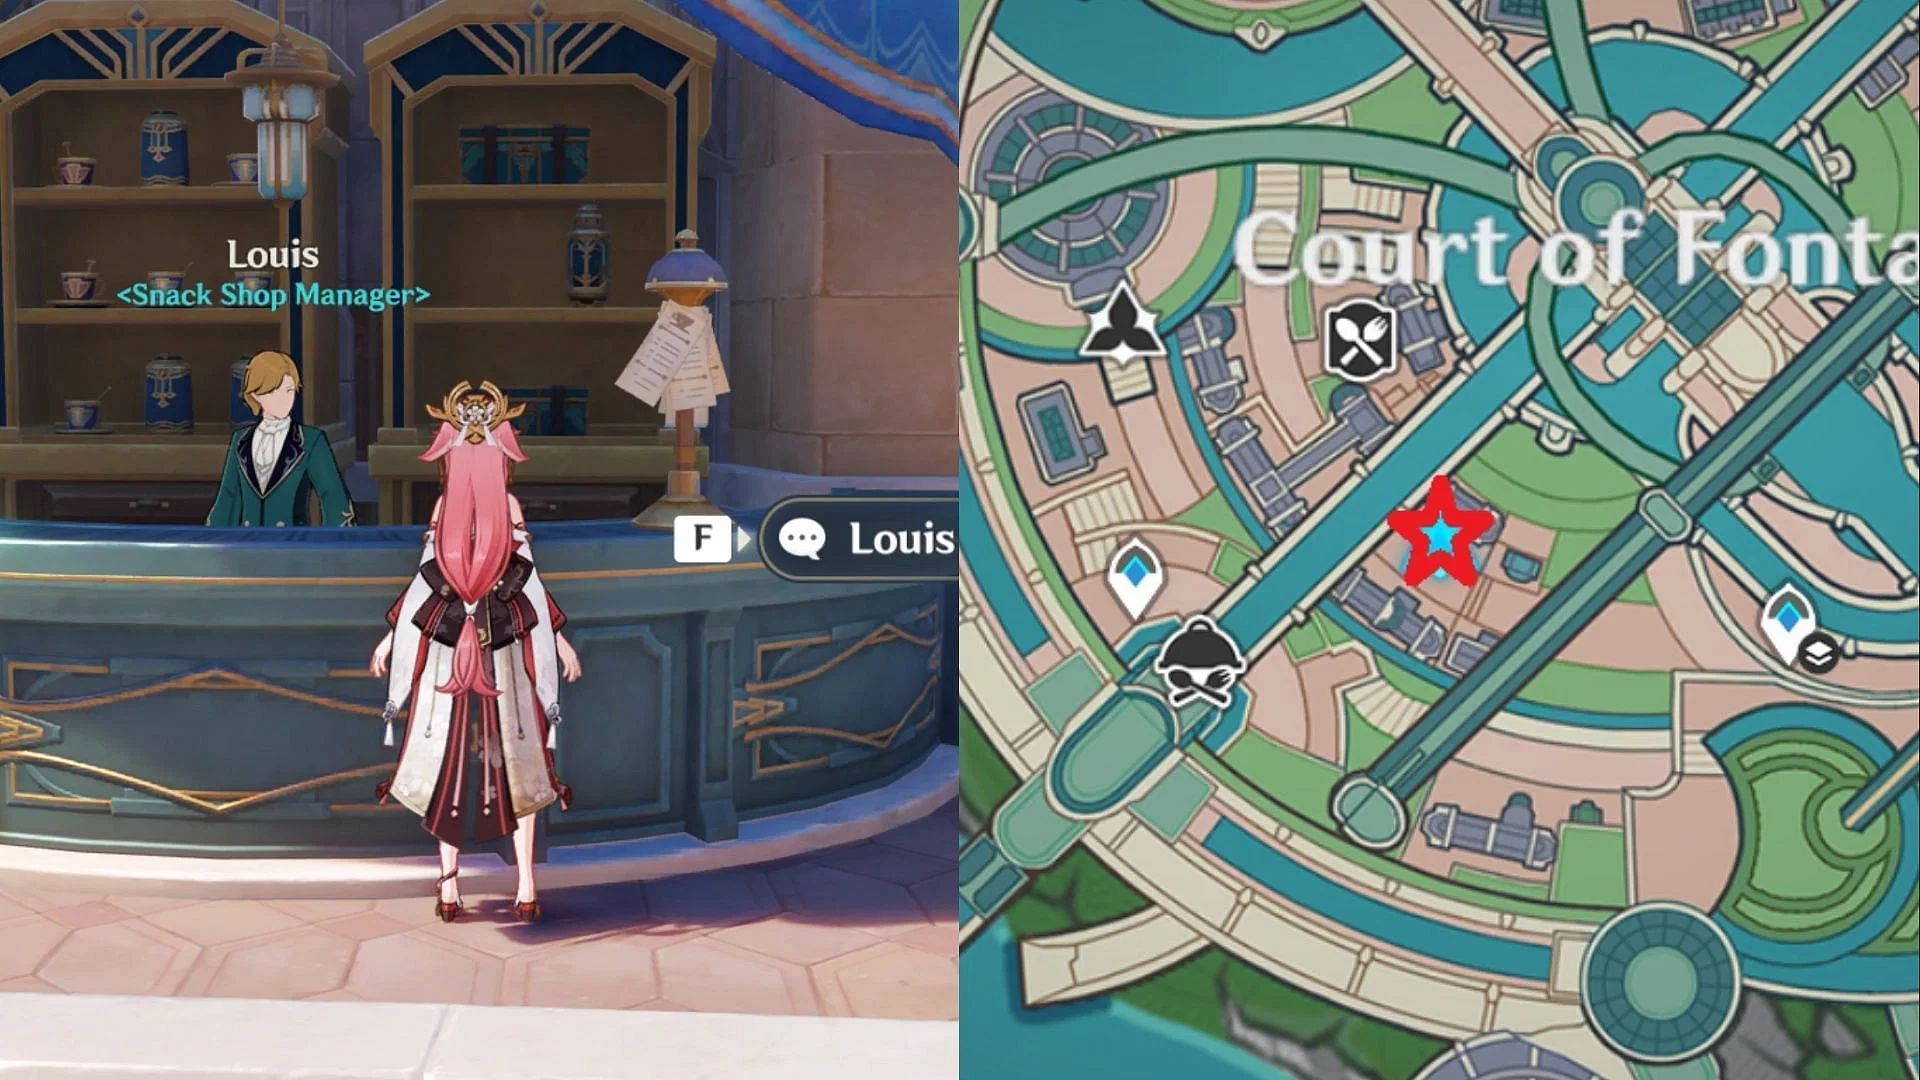 Louis&#039; snack shop location in the Court of Fontaine (Image via HoYoverse)